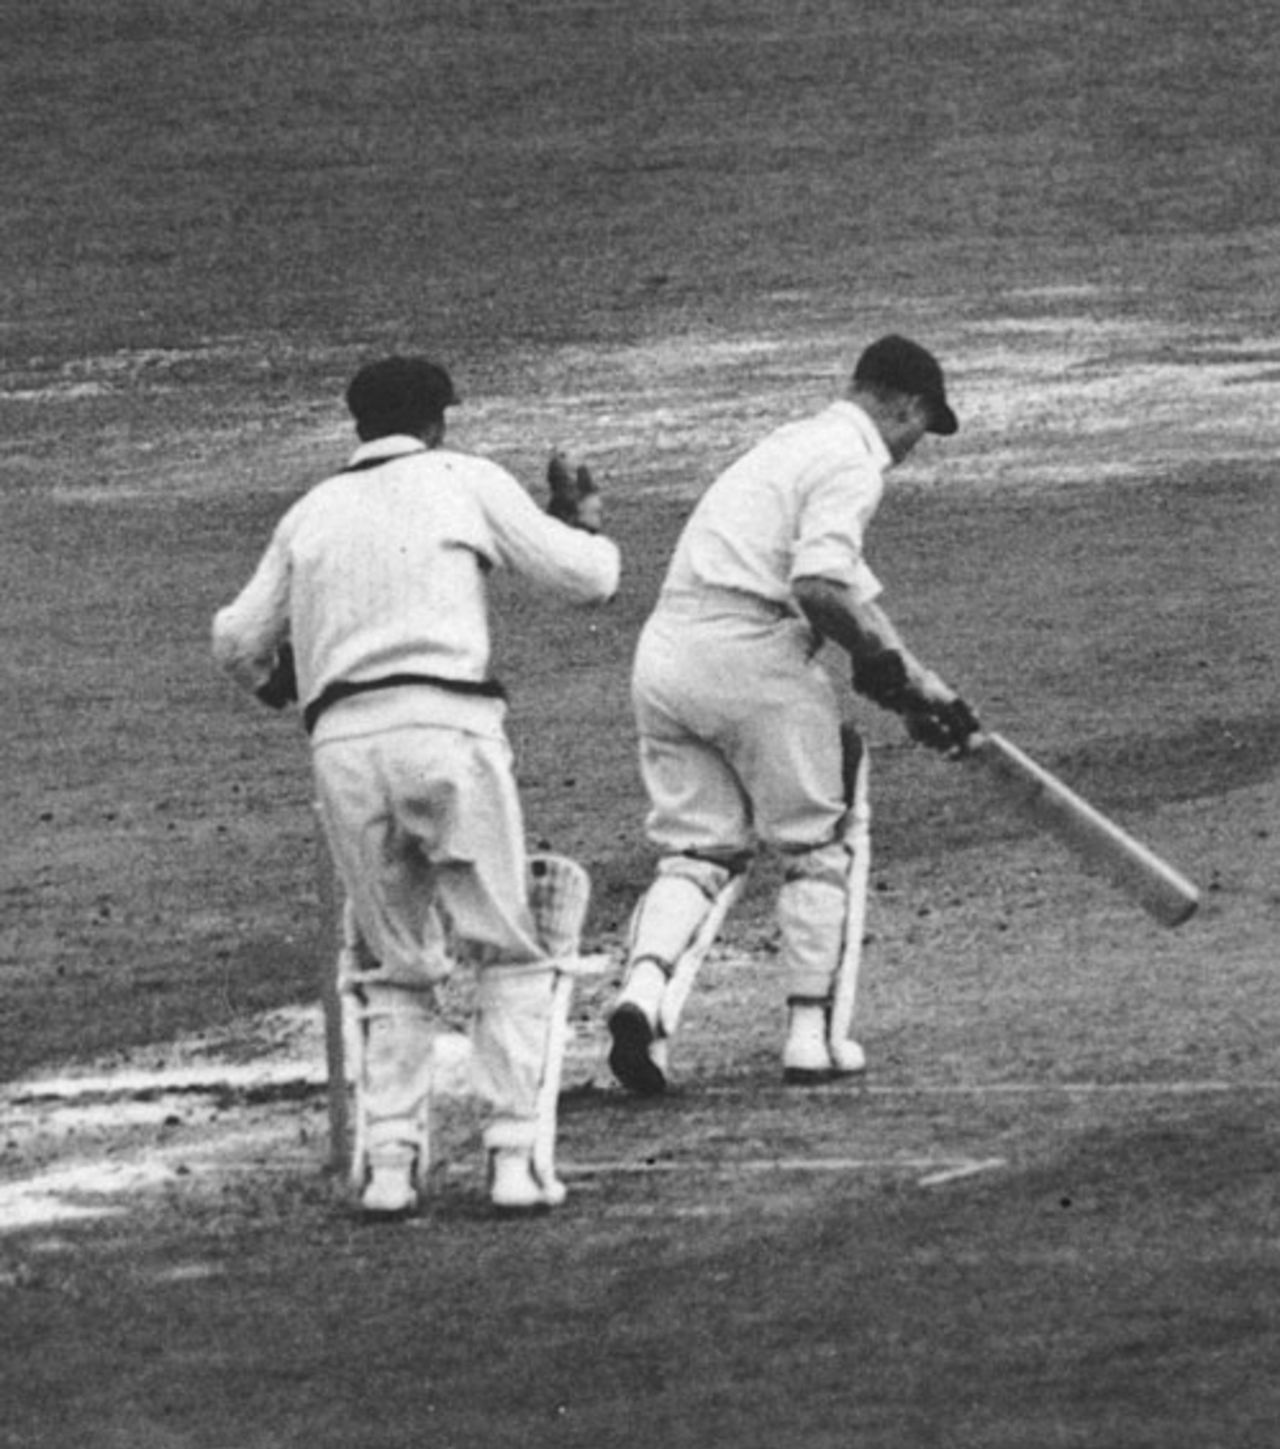 Allan Watkins is bowled for a duck, England v Australia, 5th Test, The Oval, 1st day, August 14, 1948